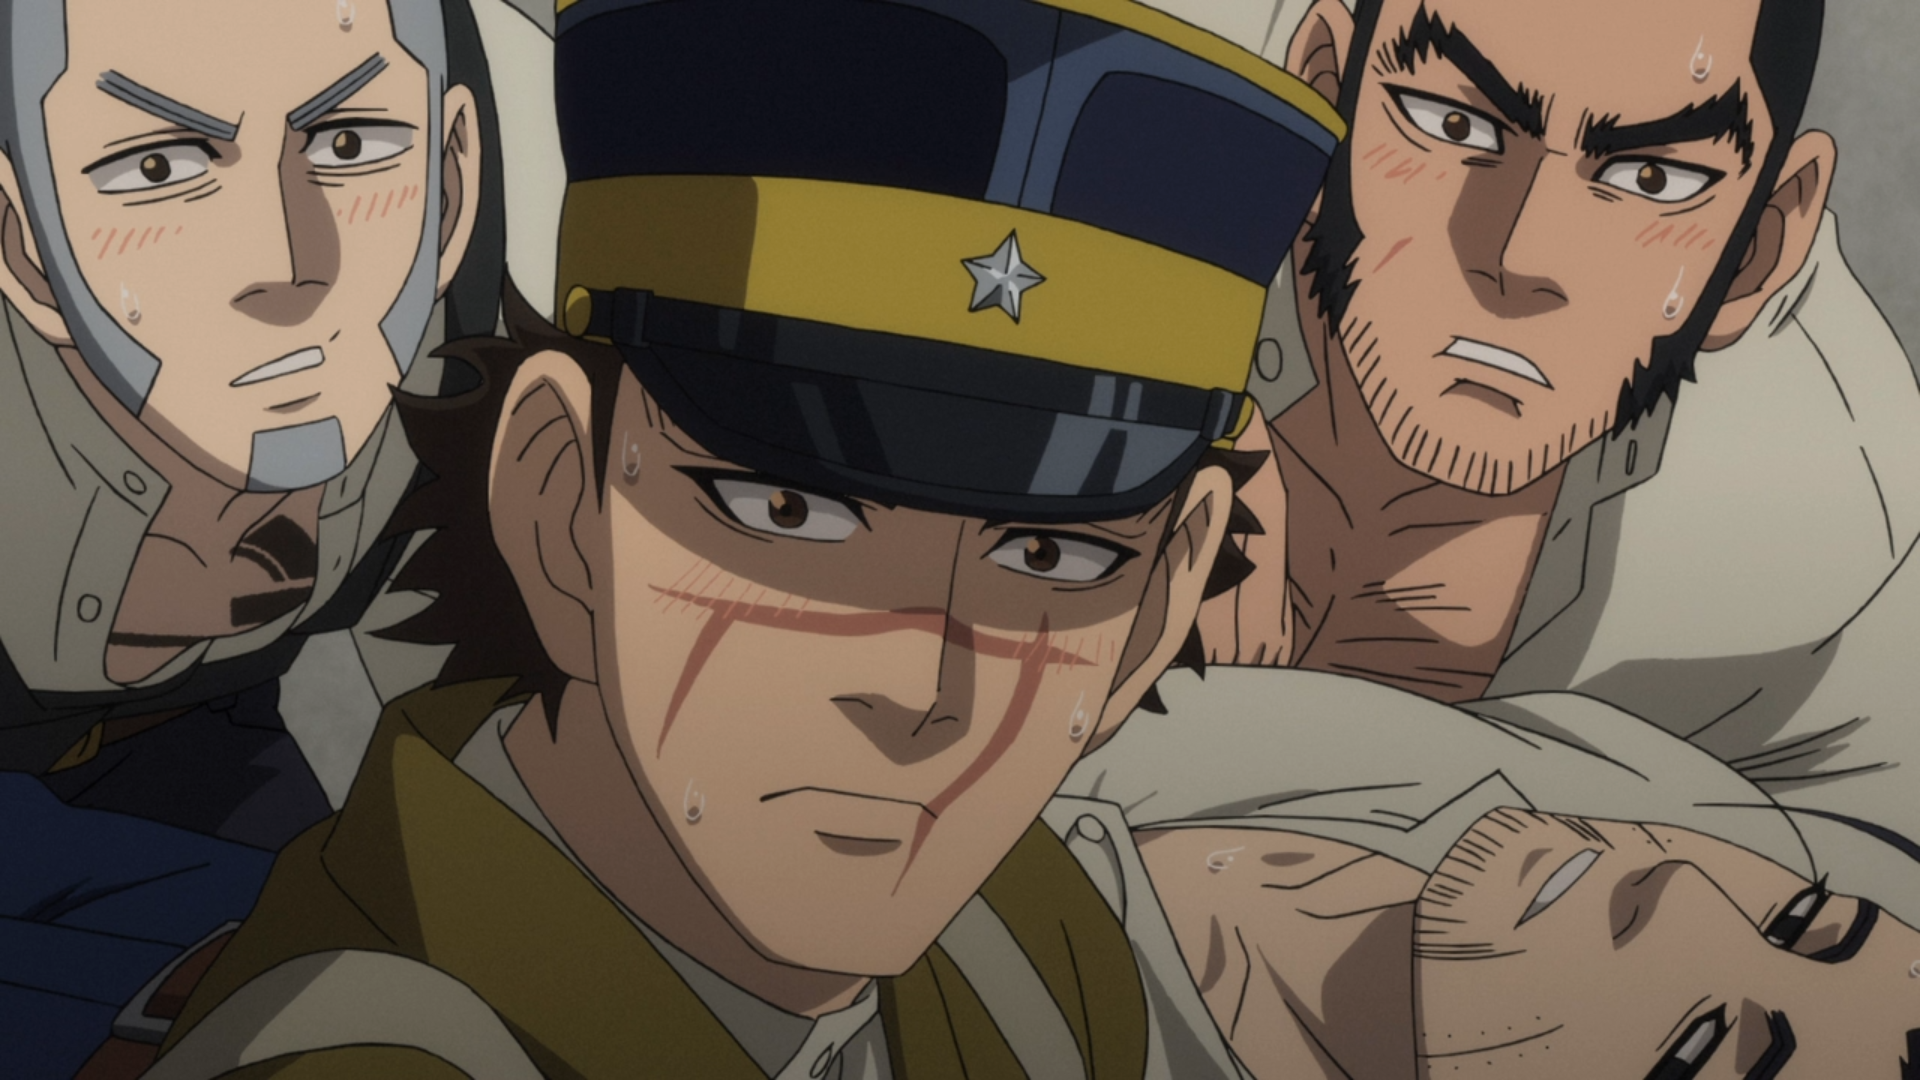 Shiraishi, Sugimoto, Tanigaki, and Ogata are all hot and bothered after consuming a meal of otter stew in a scene from Episode 20 of the Golden Kamuy TV anime.